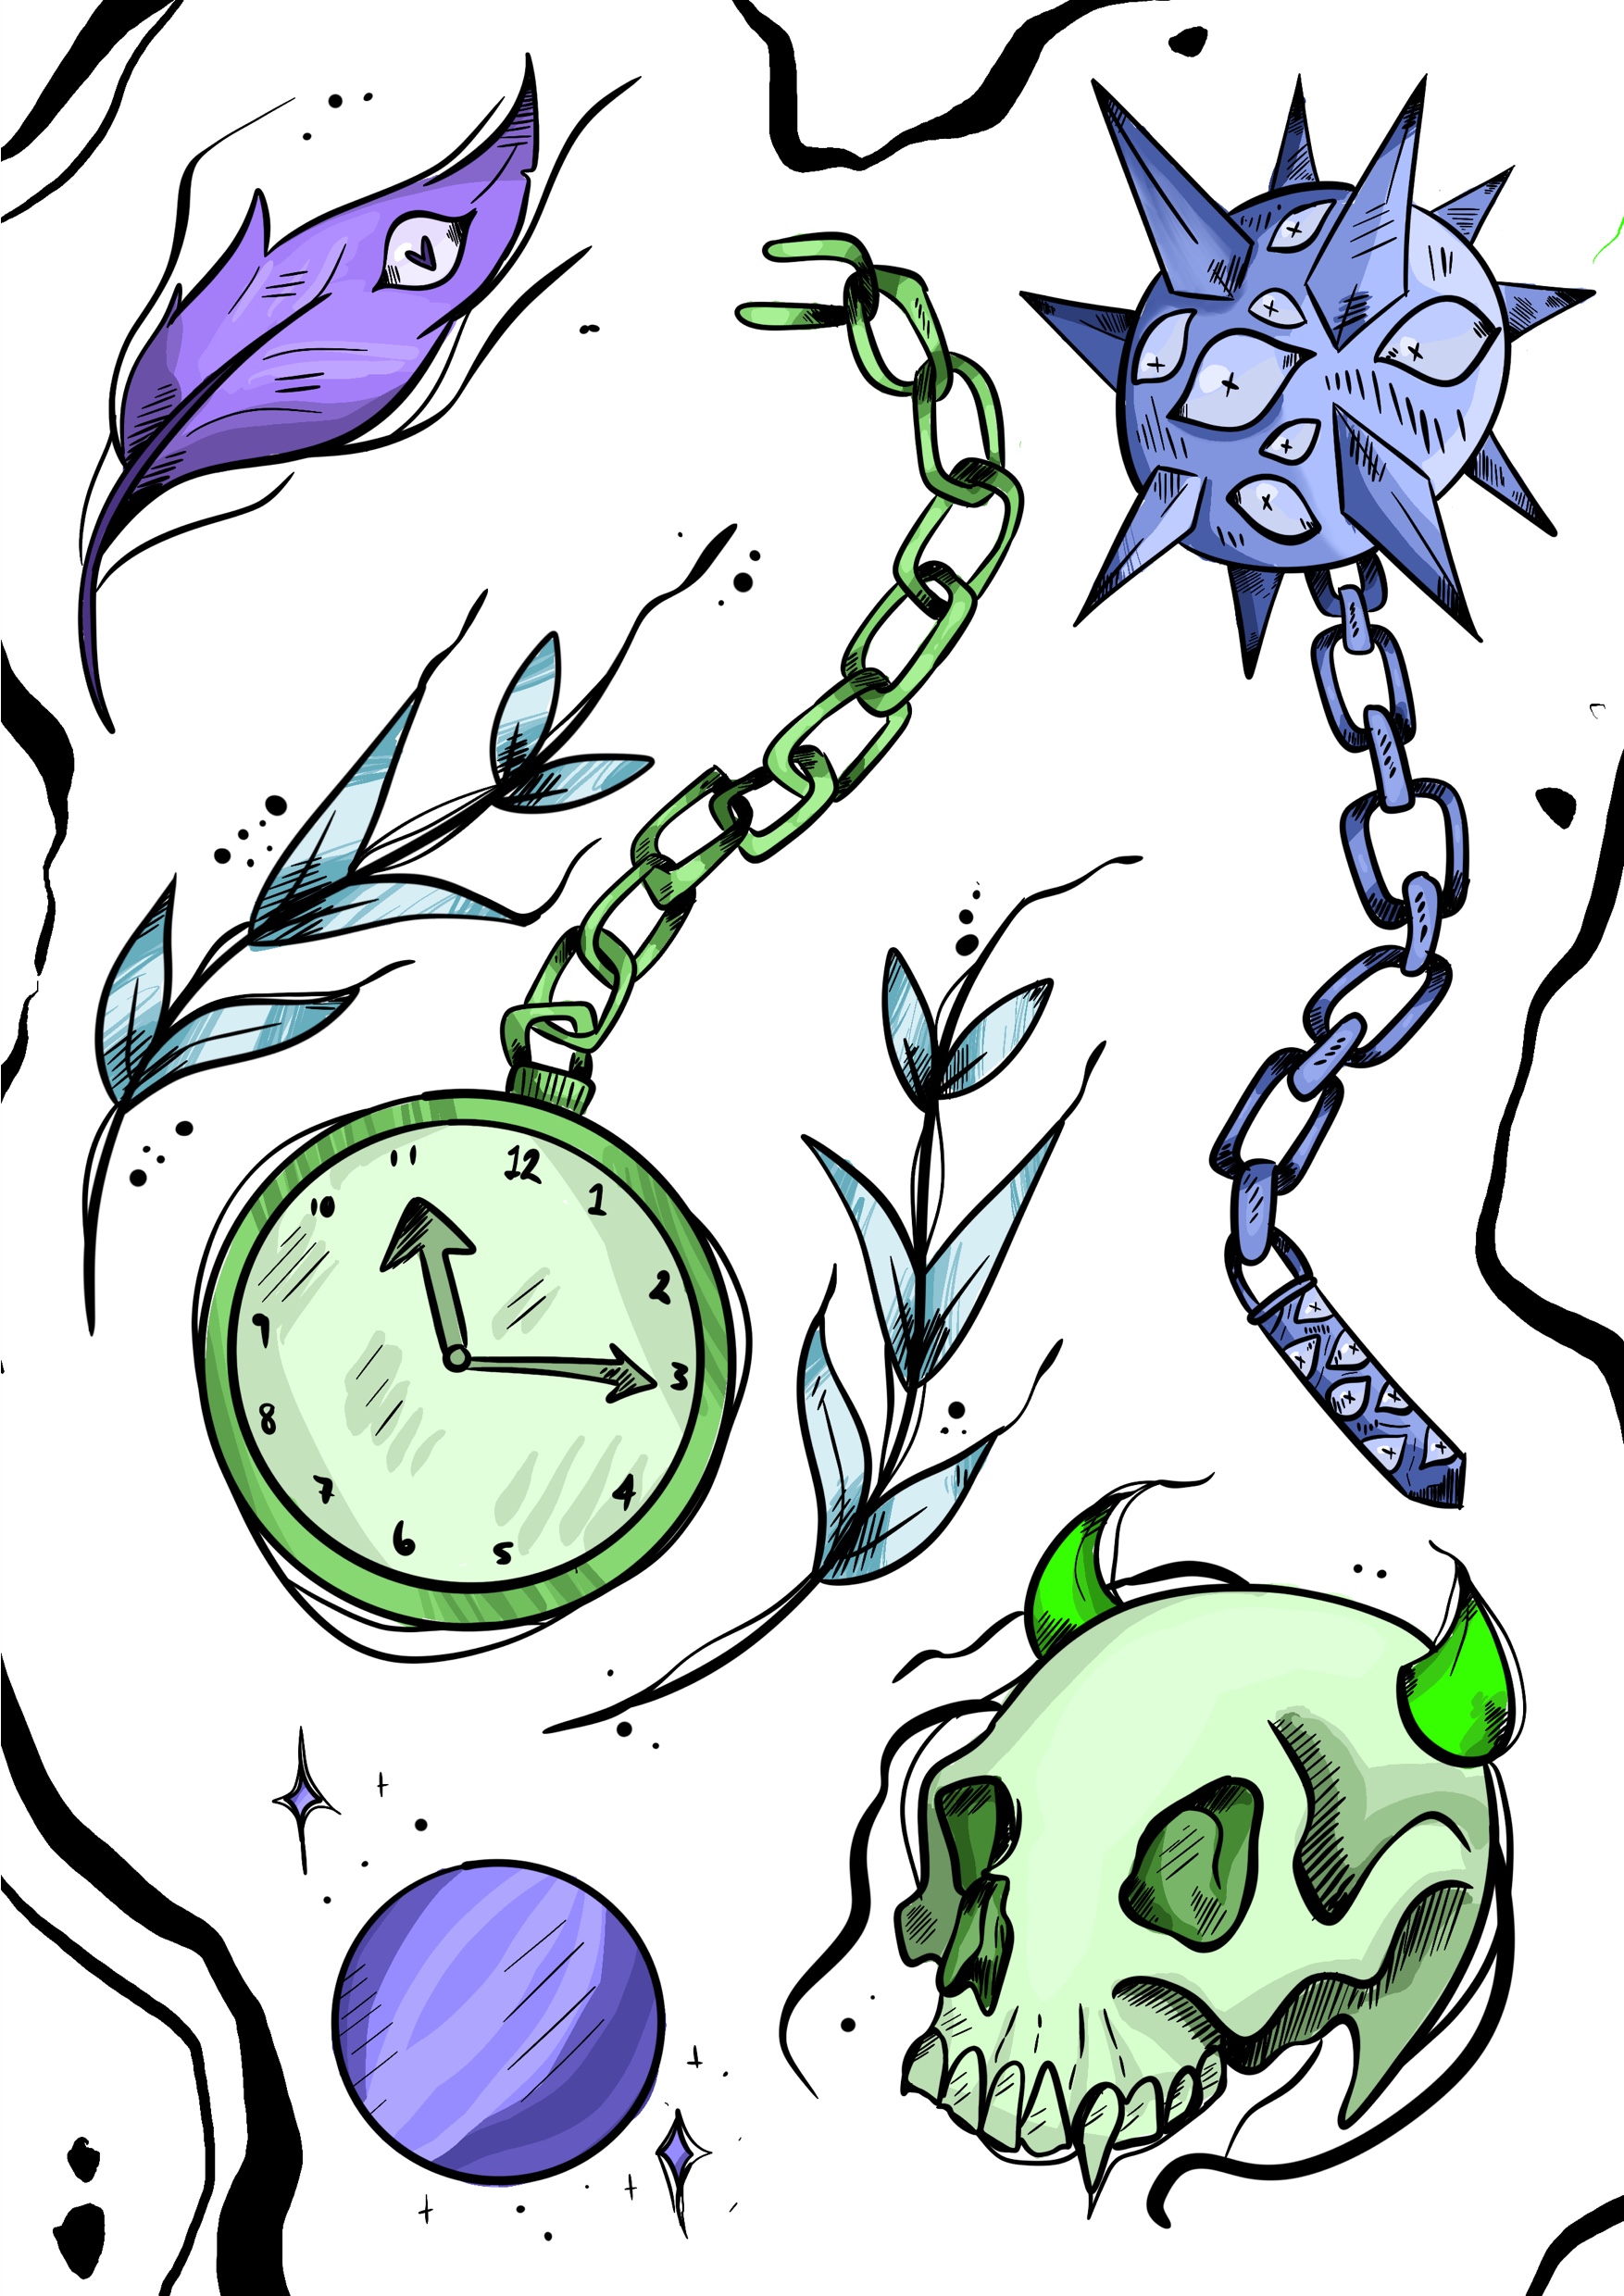 Tattoo designs based on graphic novel. Morningstar weapon covered in eyes - pale blue . Pocket watch in green, assorted leaves in various blues and a purple feather with an eye on it.